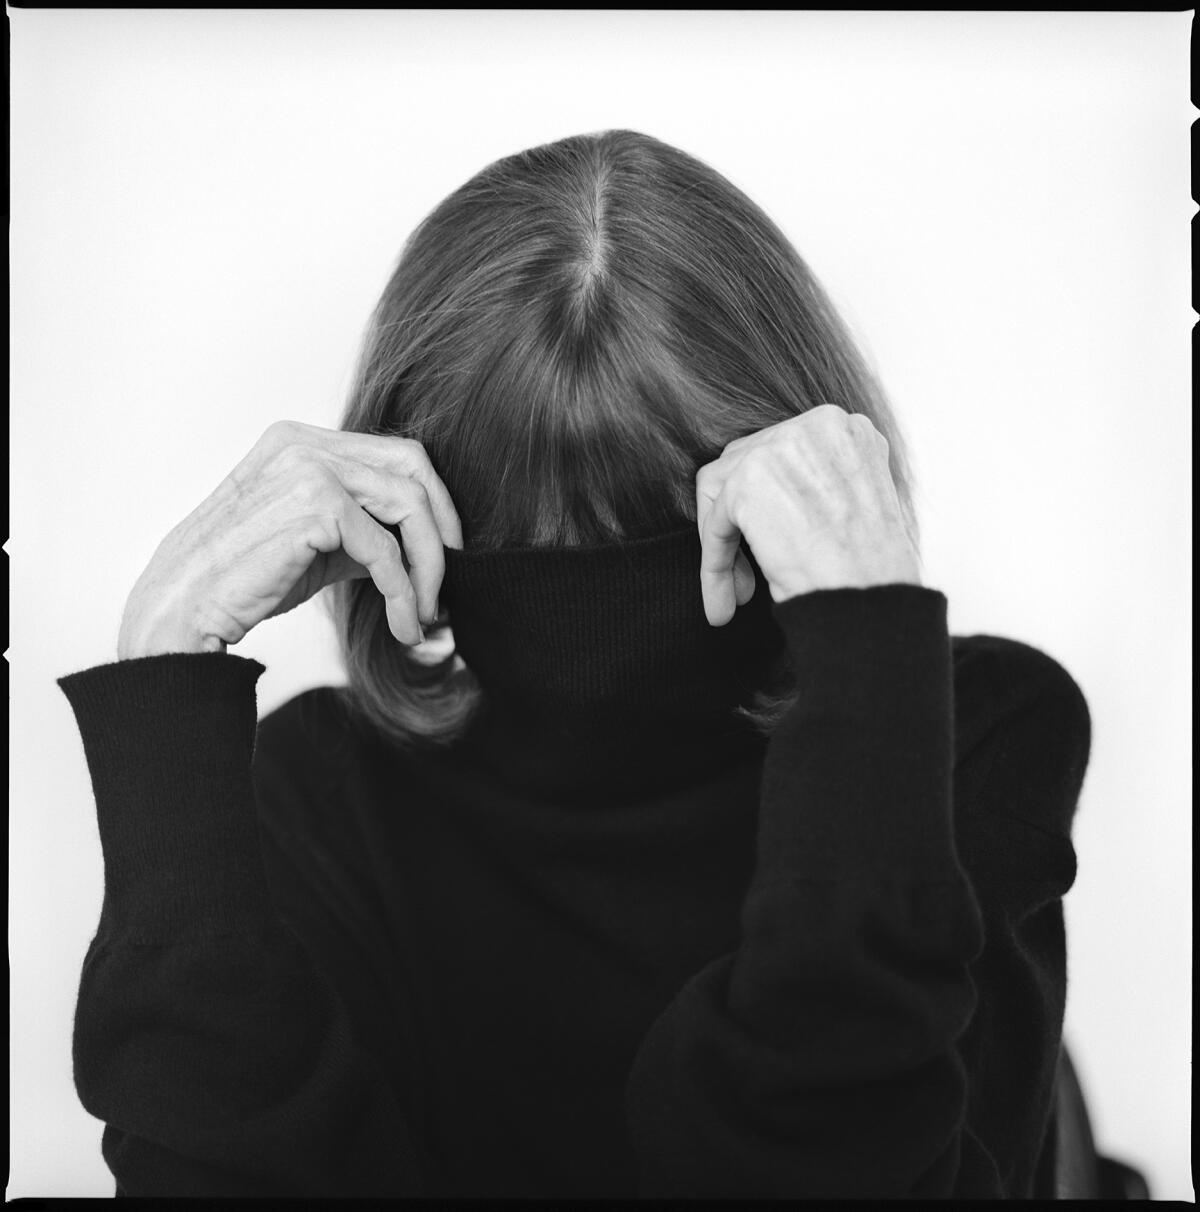 In a black and white image, Joan Didion is scene obscuring her face in her black turtleneck